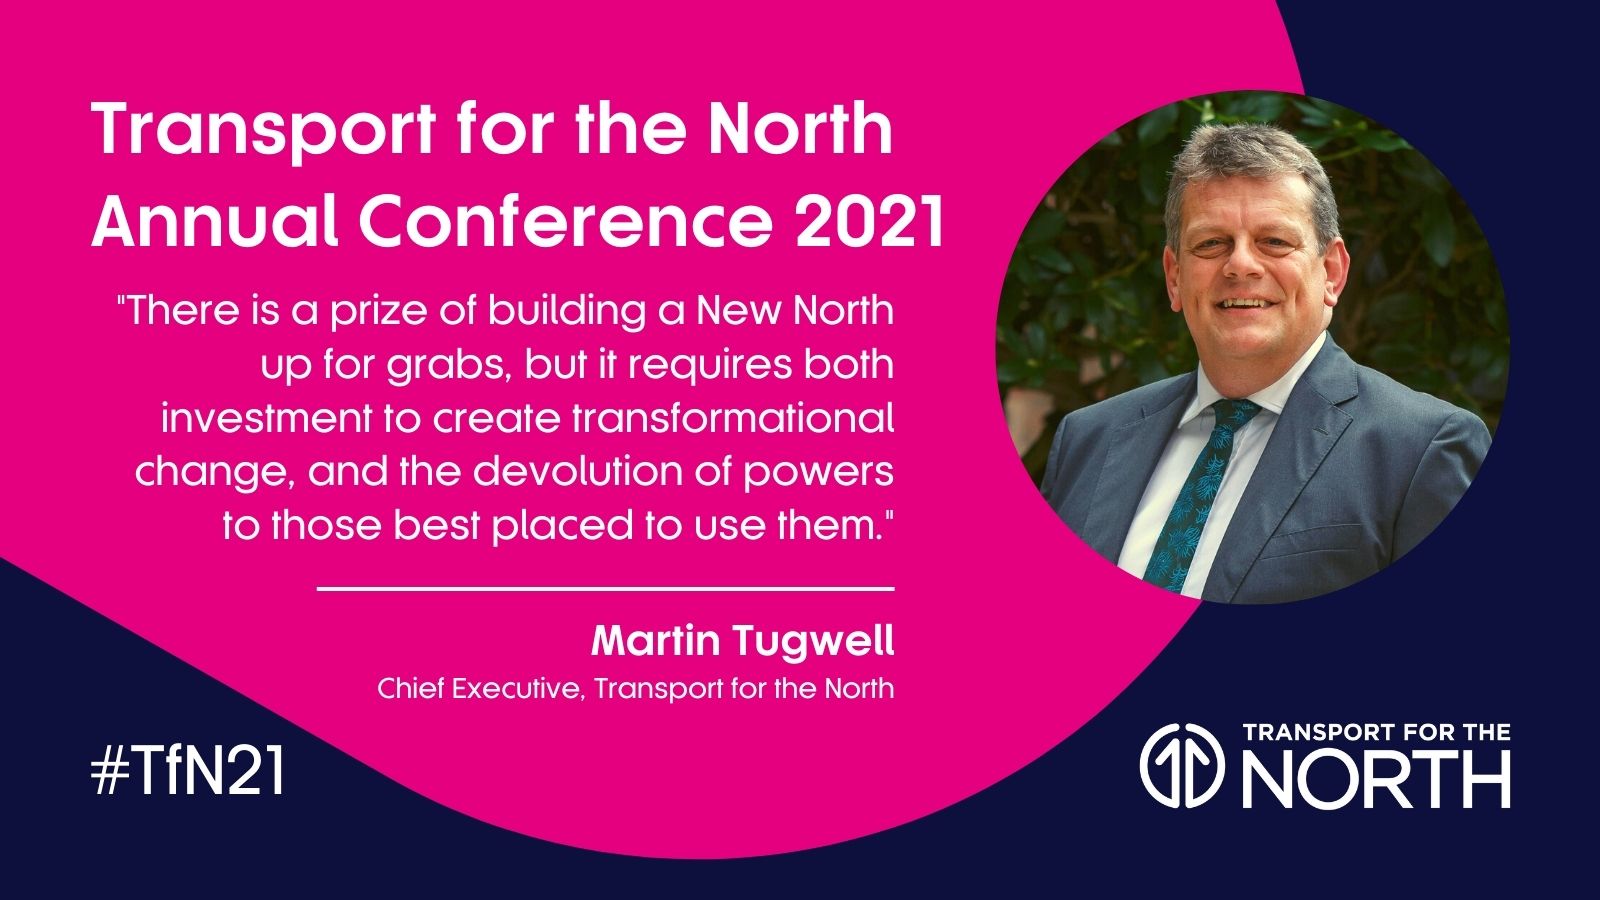 Quote about the Northern Transport Charter by Martin Tugwell